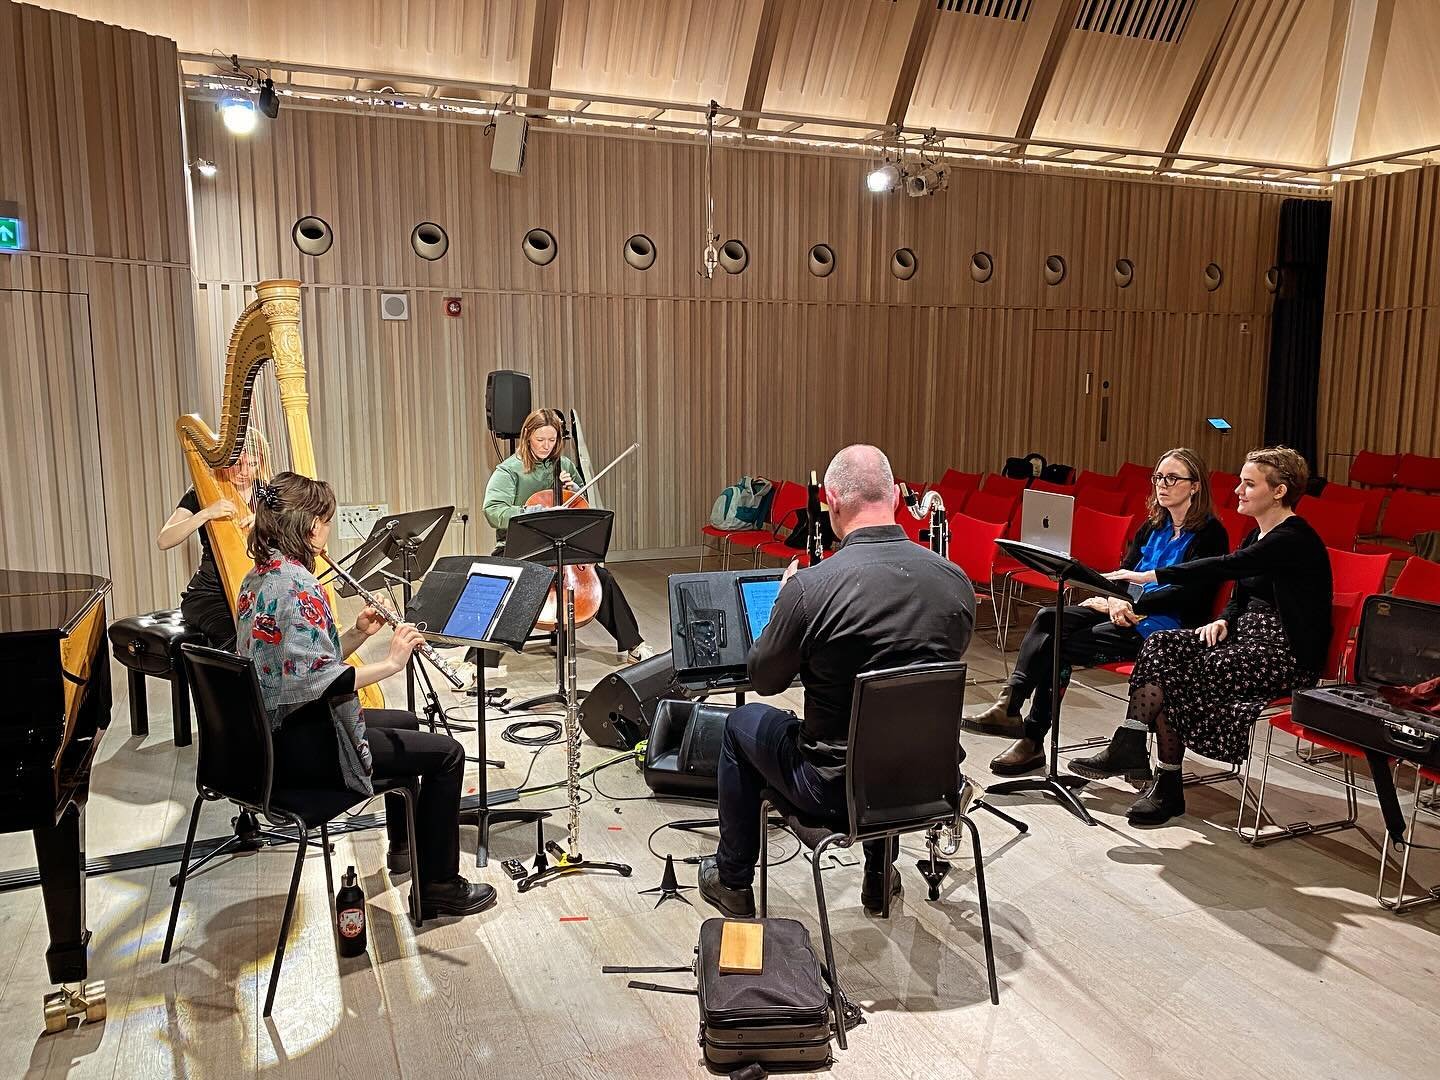 Rehearsing for tonight&rsquo;s gig (6.30pm  @royalacademyofmusic )
Culmination of great project with postgrad composers  Ashkan Layegh, Yan Ee Toh, James Garner, Hani Elias and Sarah Marze
Also working with RAM flautist Lydia Walquist and harpist Gra